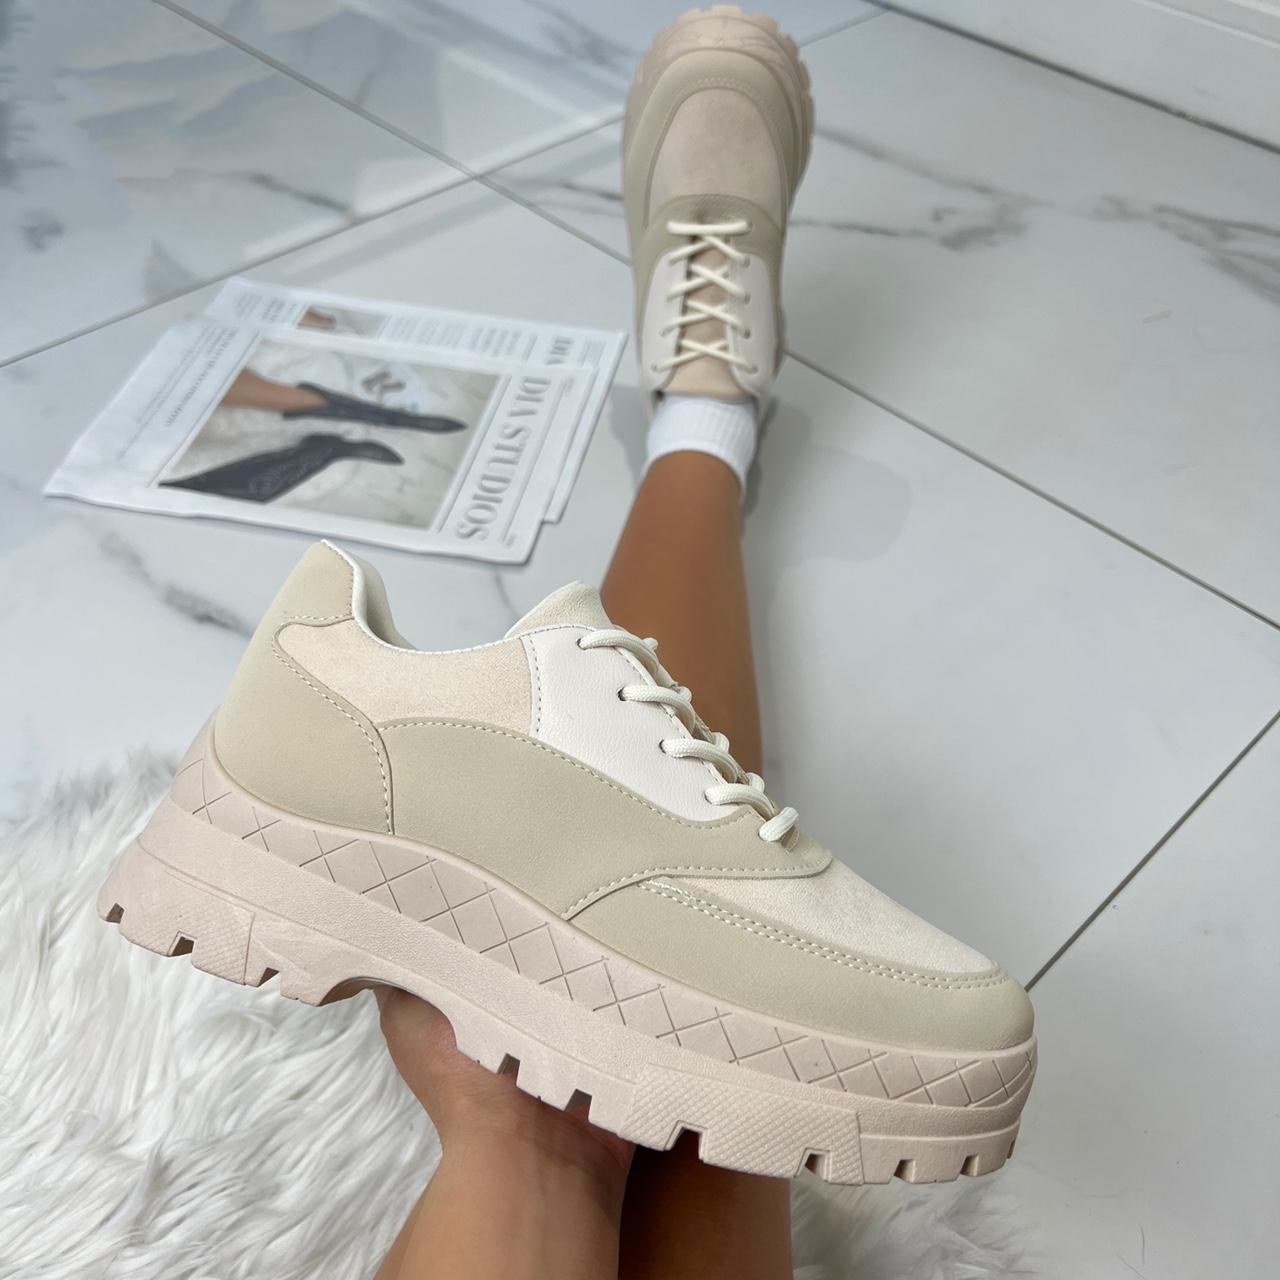 Women's Cream and Tan Trainers | Depop